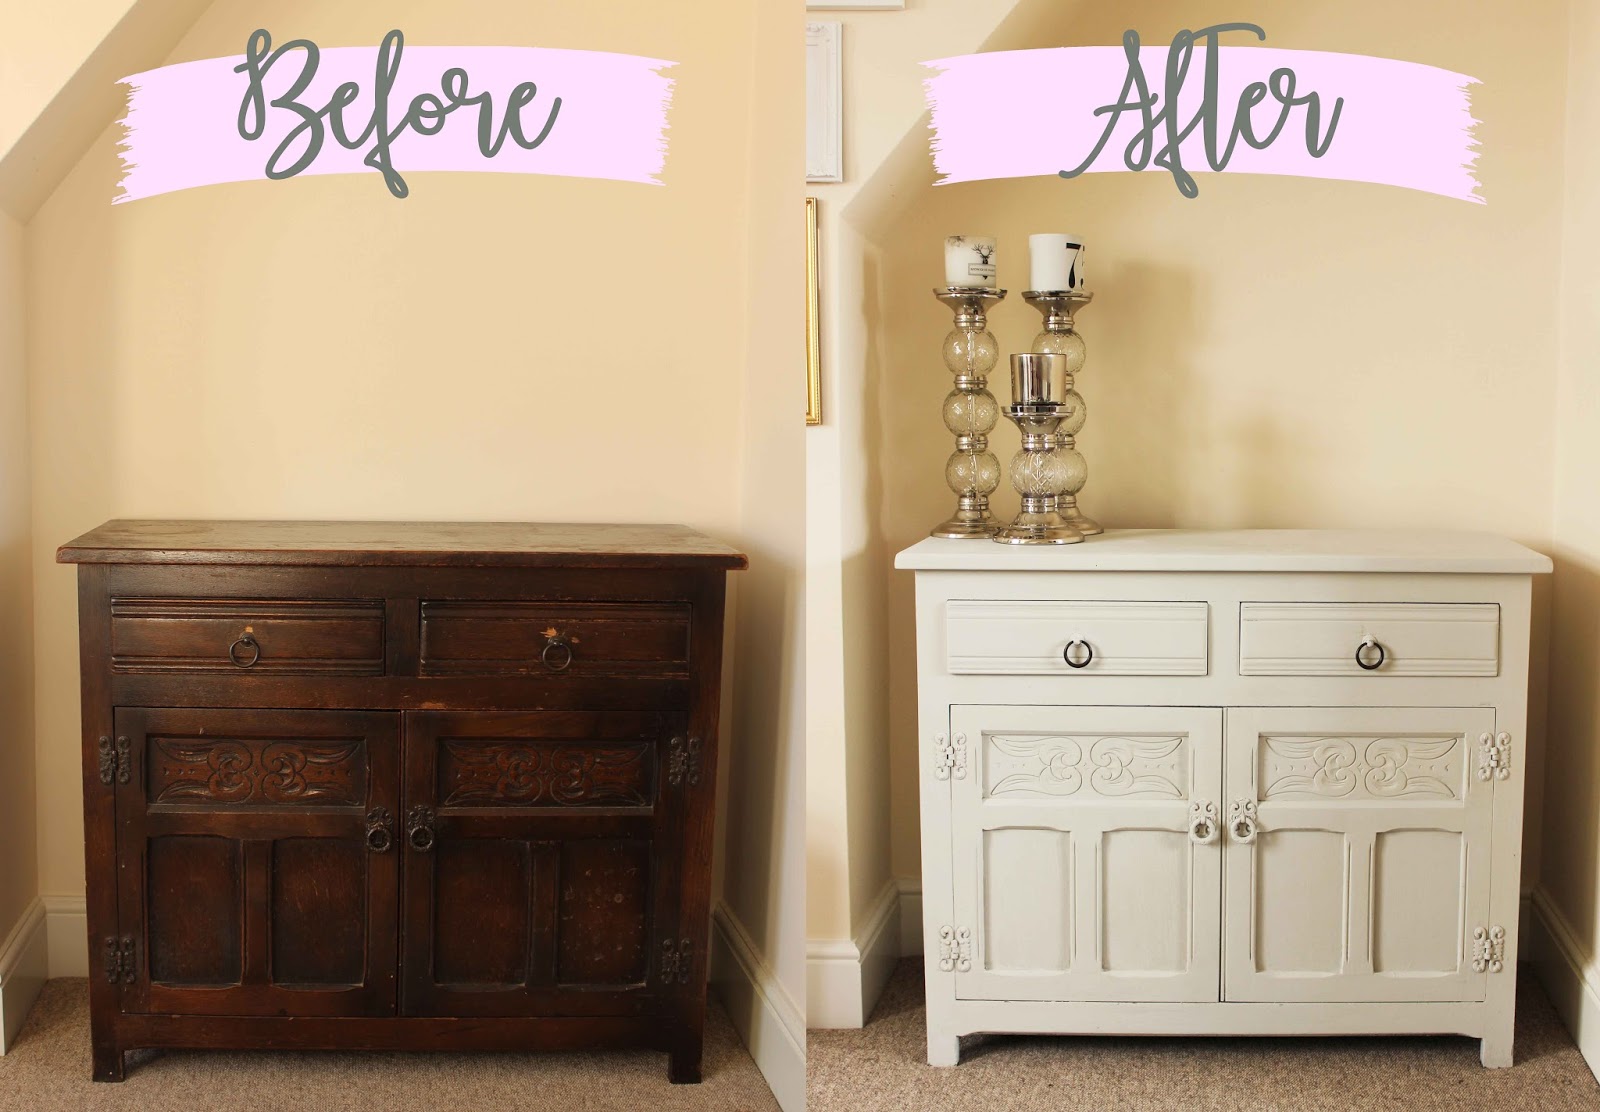 Upcycling a Wooden Cabinet with Rust-Oleum Furniture Paint